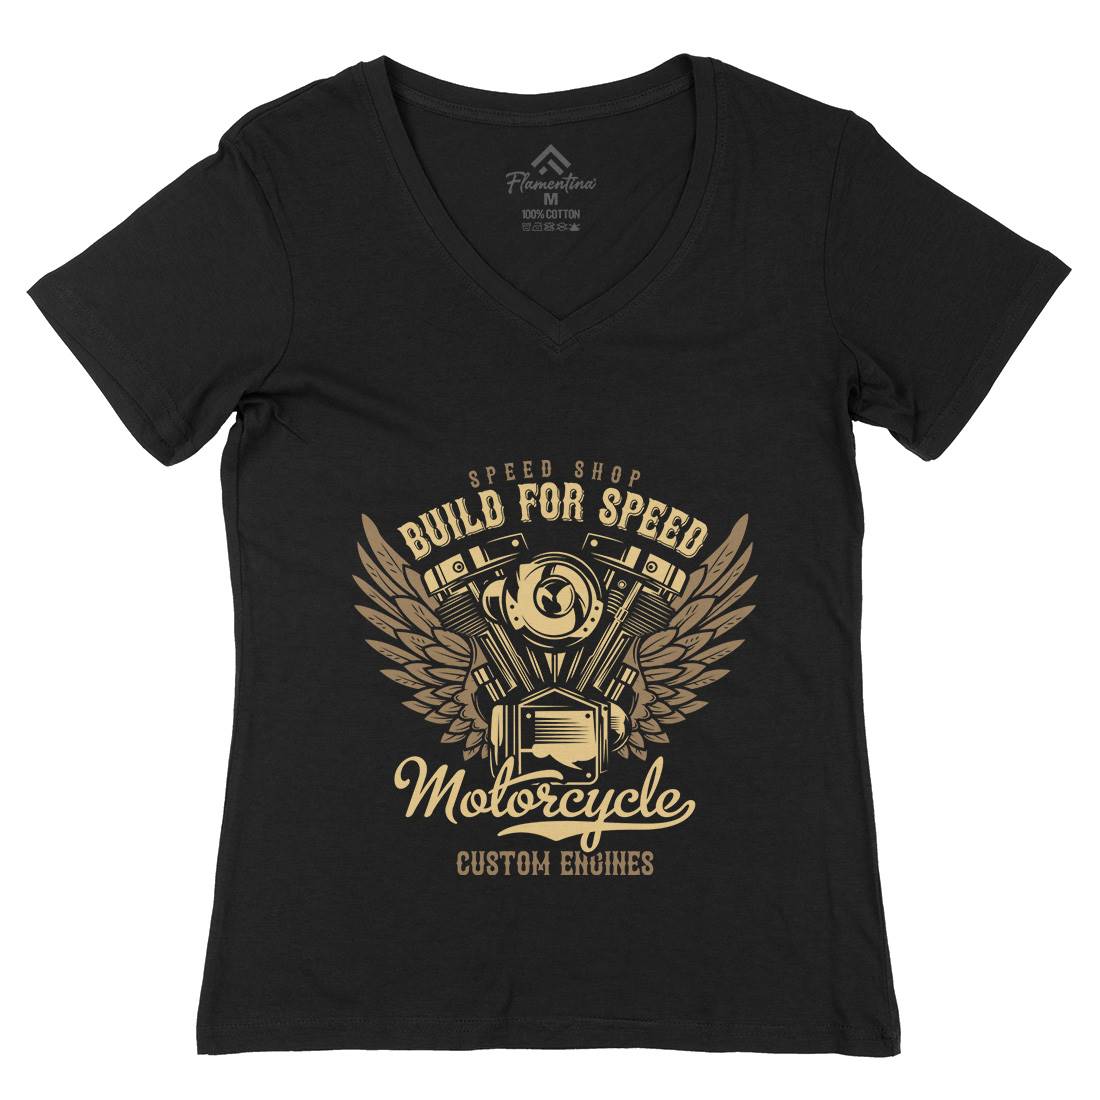 Build For Speed Womens Organic V-Neck T-Shirt Motorcycles B842